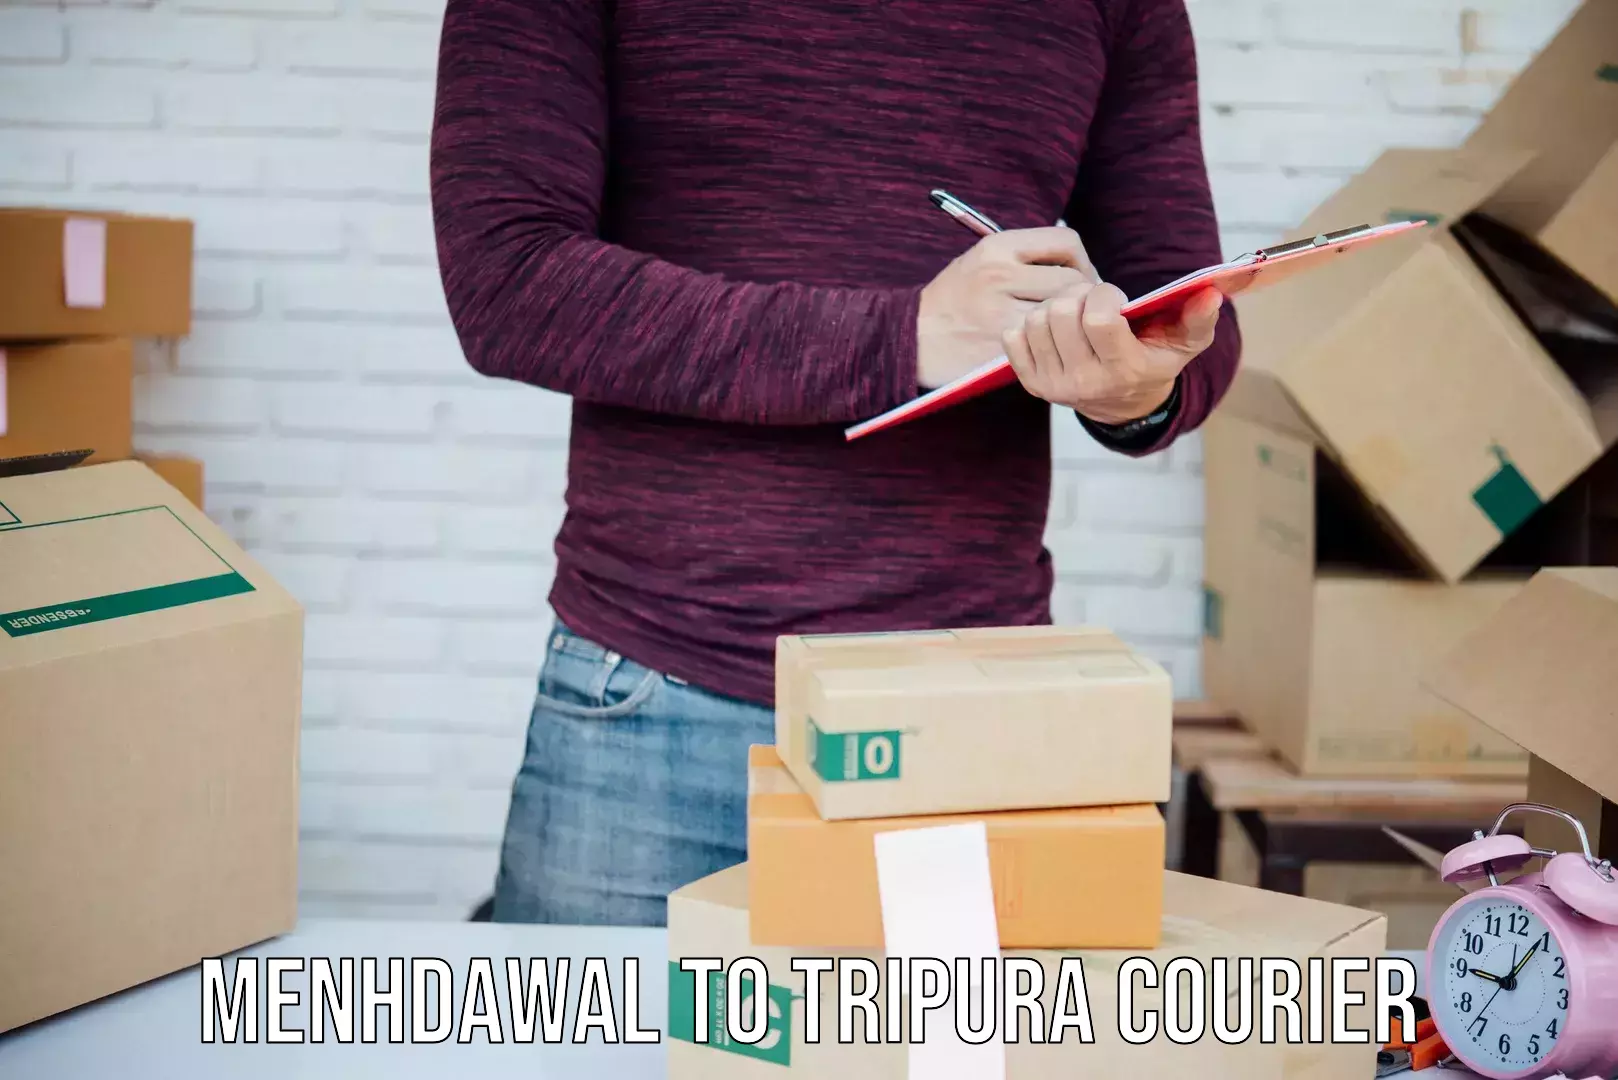 User-friendly delivery service Menhdawal to Tripura